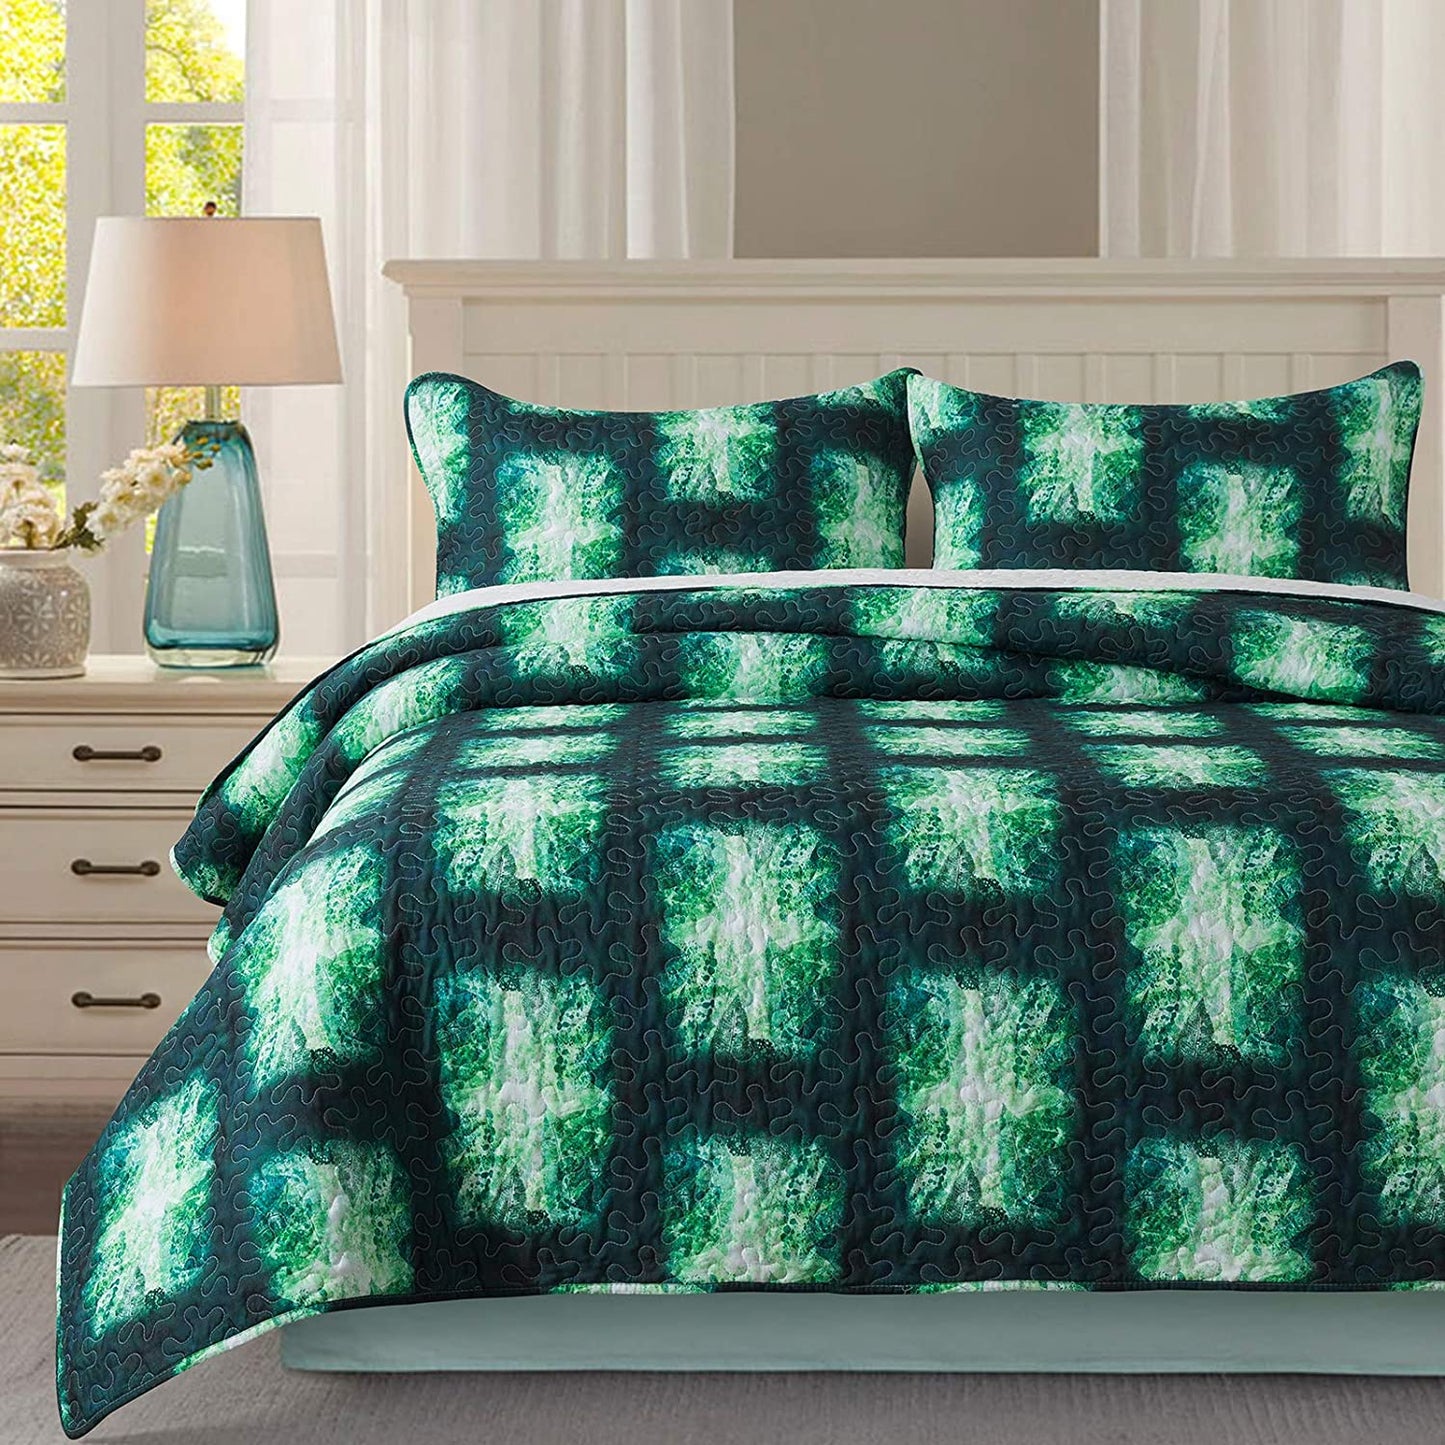 Microfiber Quilt Bedspread Sets-Green Trees Leaves Pattern Reversible Coverlet Set,Queen Size